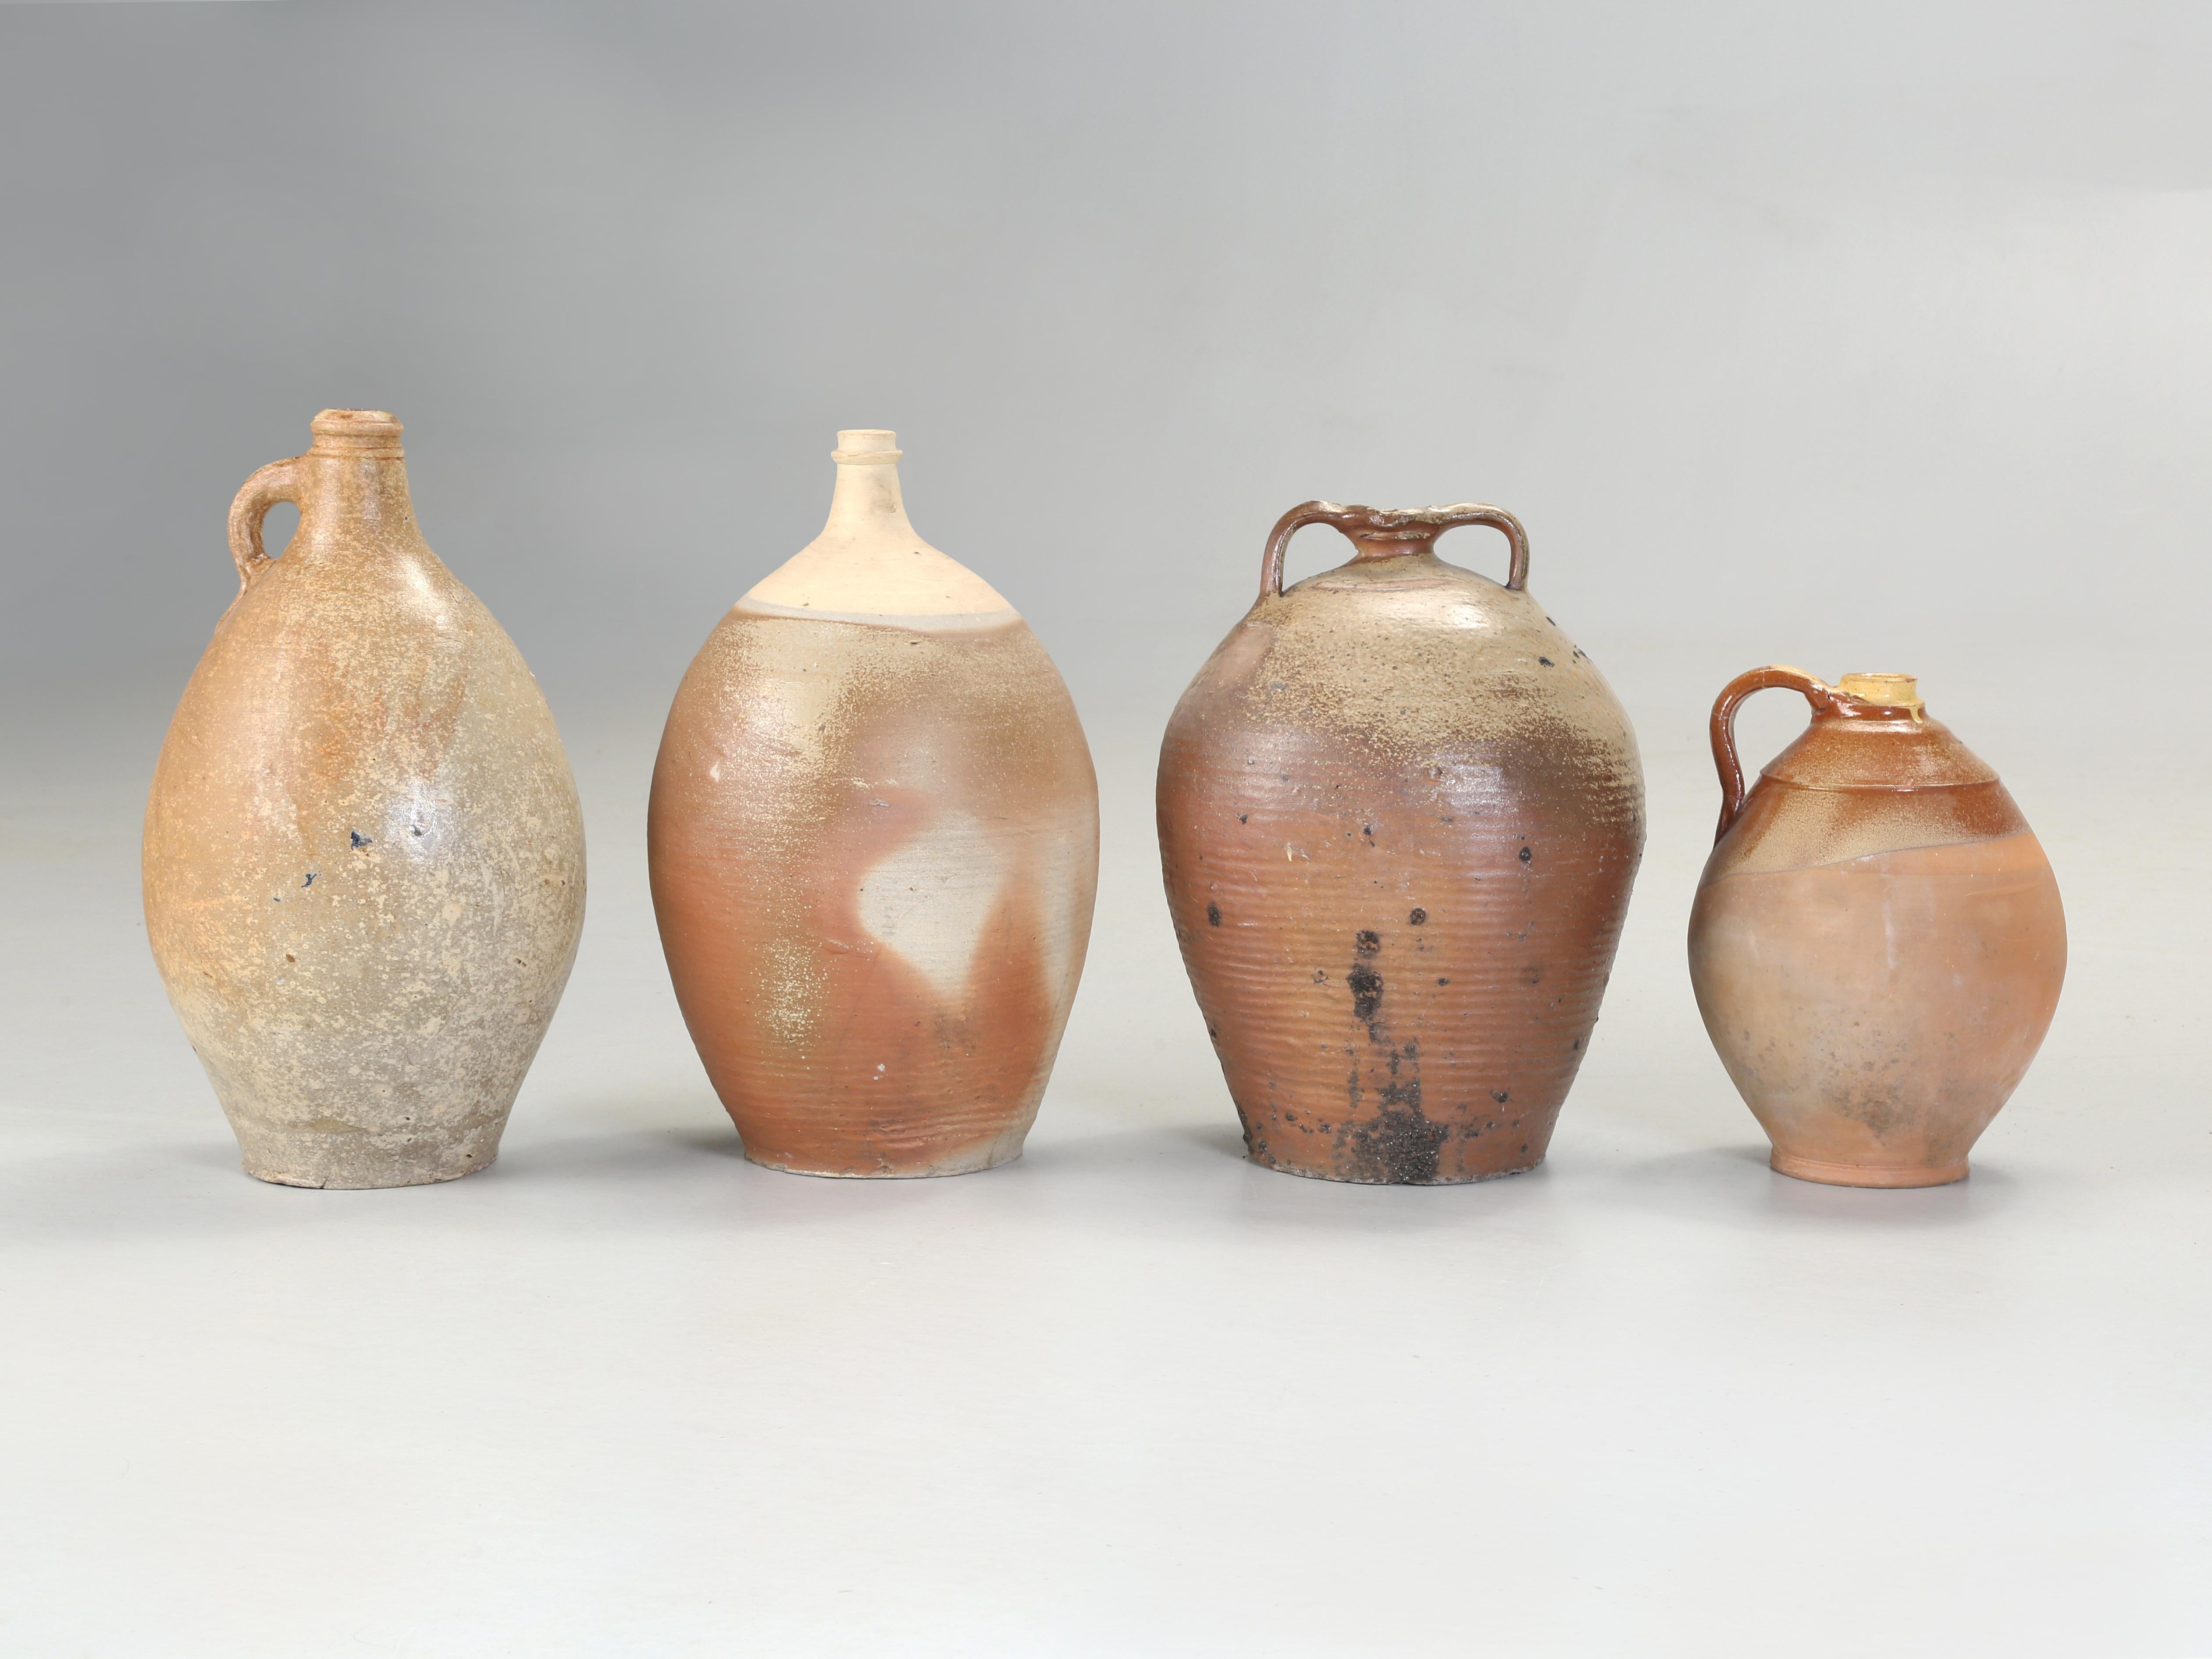 Collection of (4) beautiful Antique French Stoneware Pottery Jugs from the early 1900's purchased in Provence Region of France. Typically these were used to transport walnut oil or water and make for wonderful decorative objects. 119
Measurements